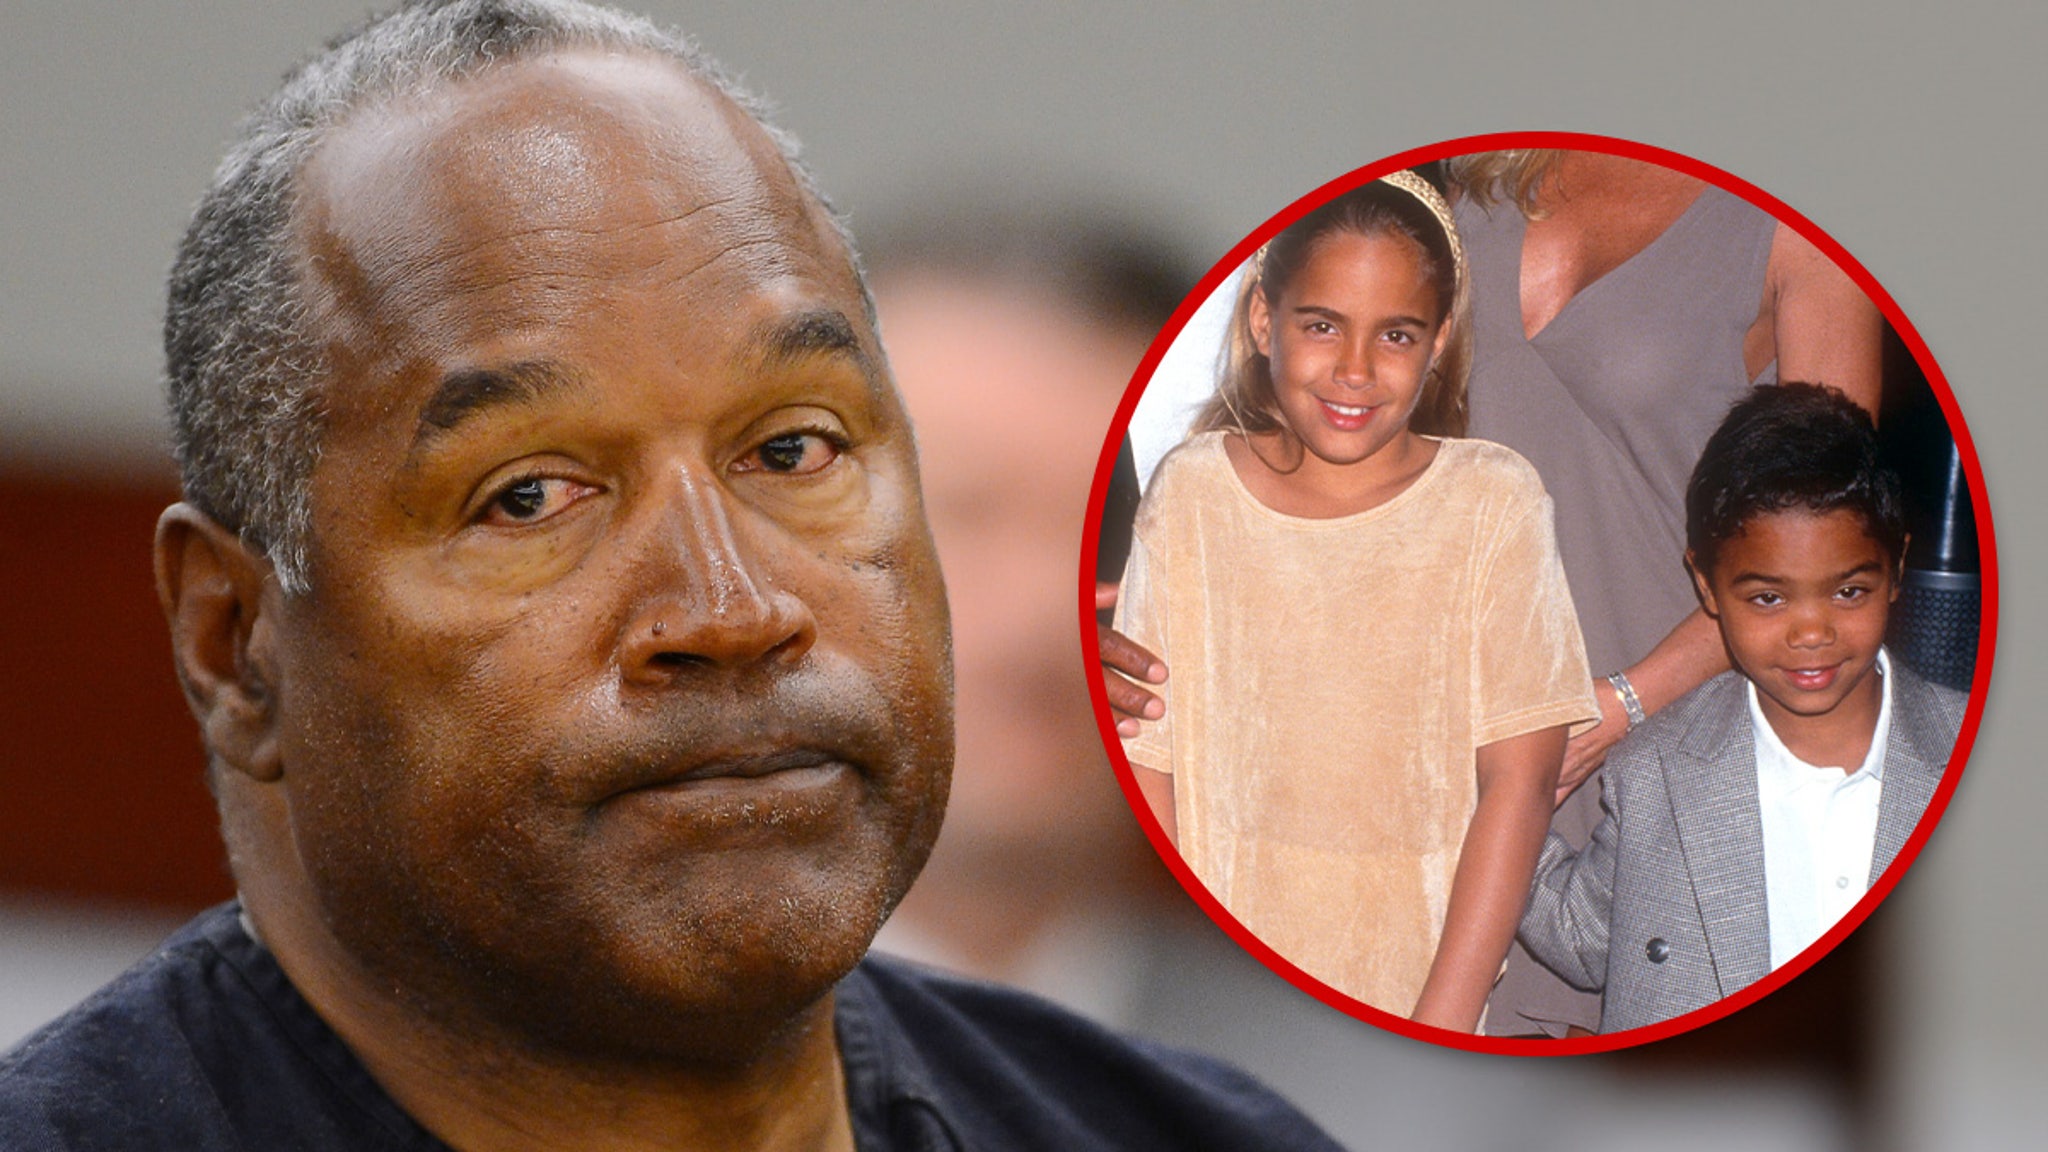 All of OJ Simpson's children involved in the last days before death